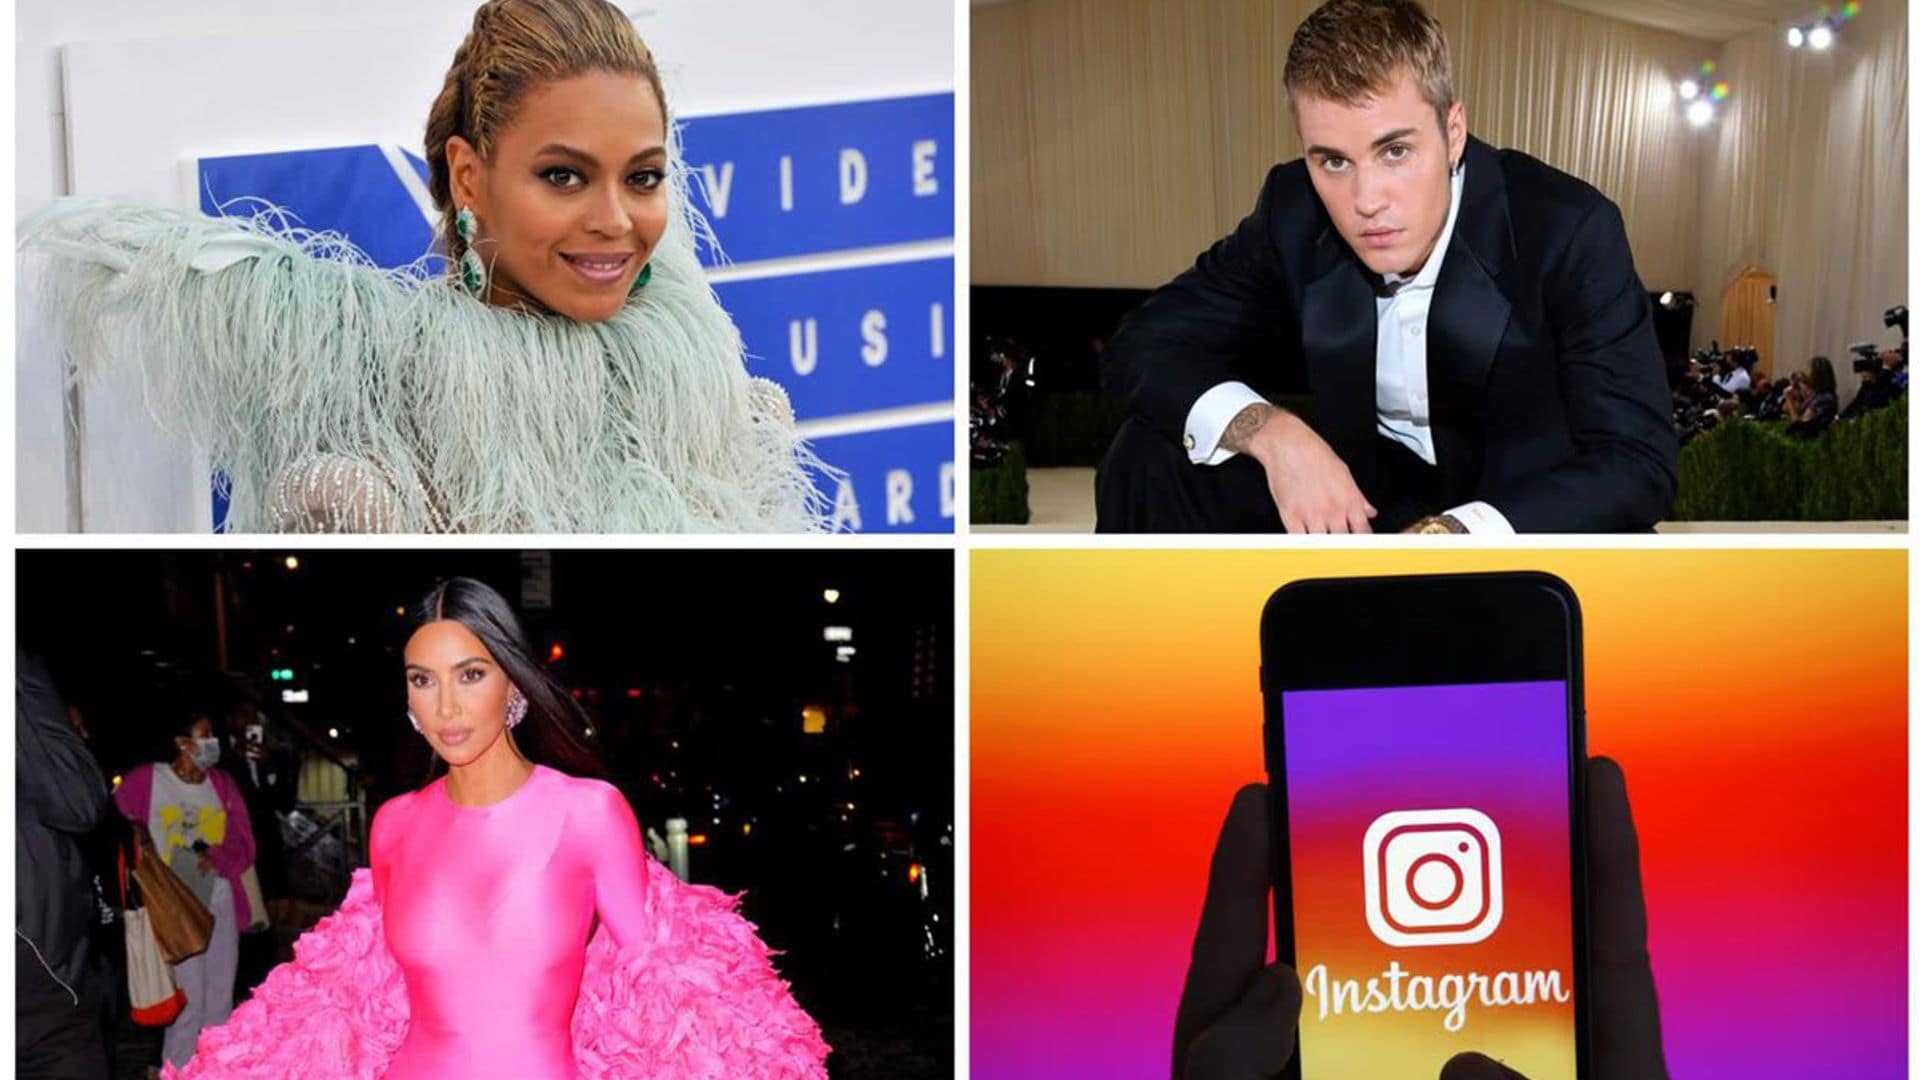 Here are the world’s 10 most followed Instagram accounts